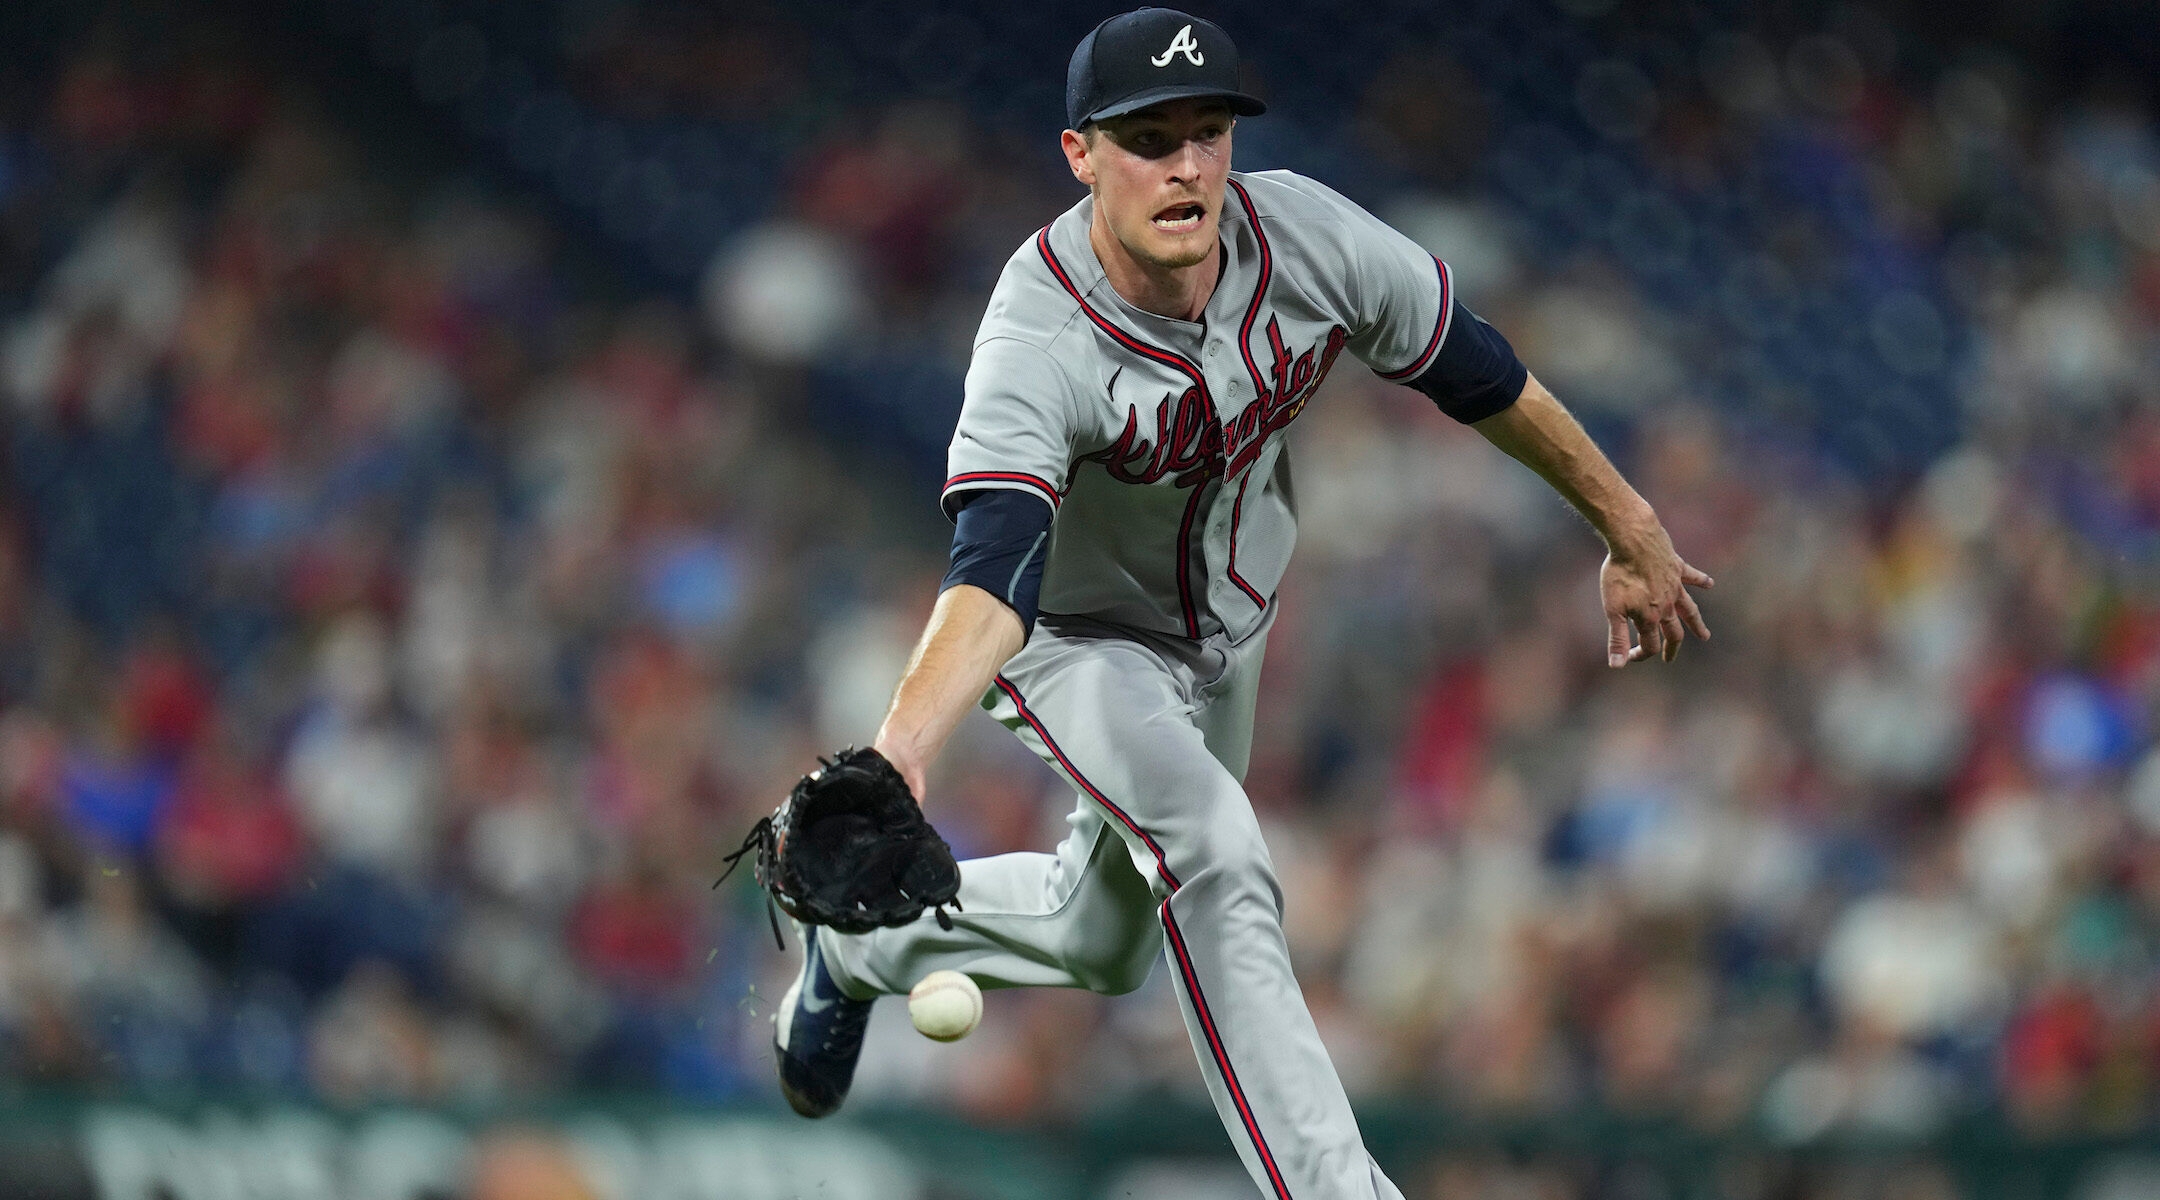 Max Fried on hot spot on finger: 'Kind of caught it before it got